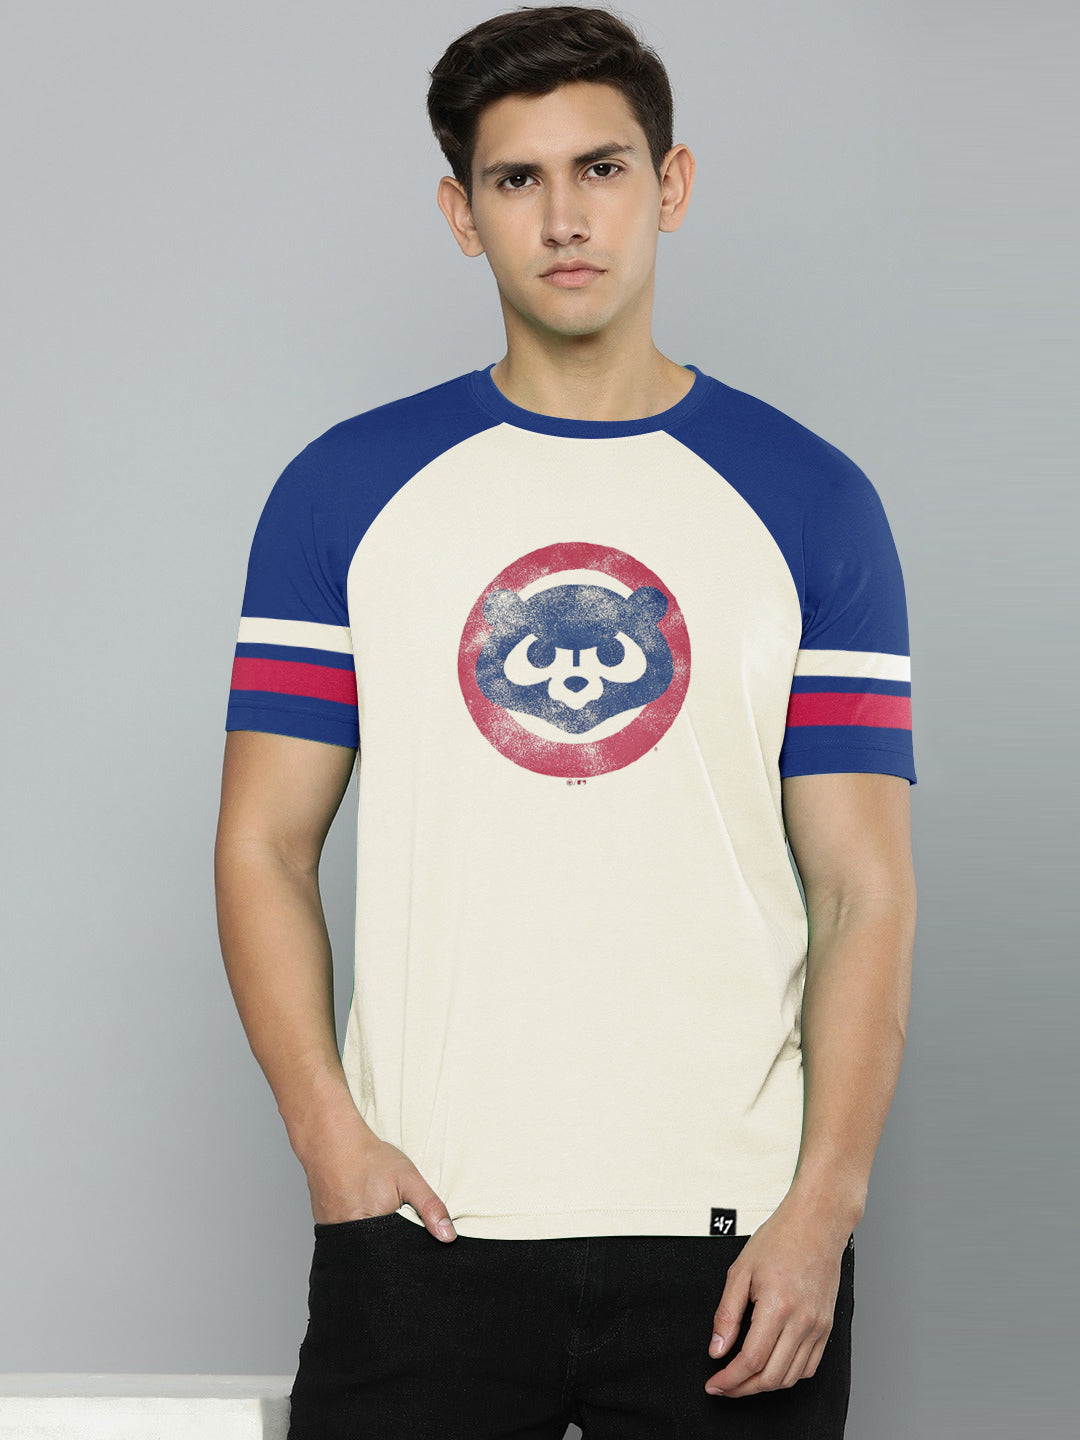 47 Crew Neck Half Sleeve Tee Shirt For Men-Off Whtie with Blue-BE1149